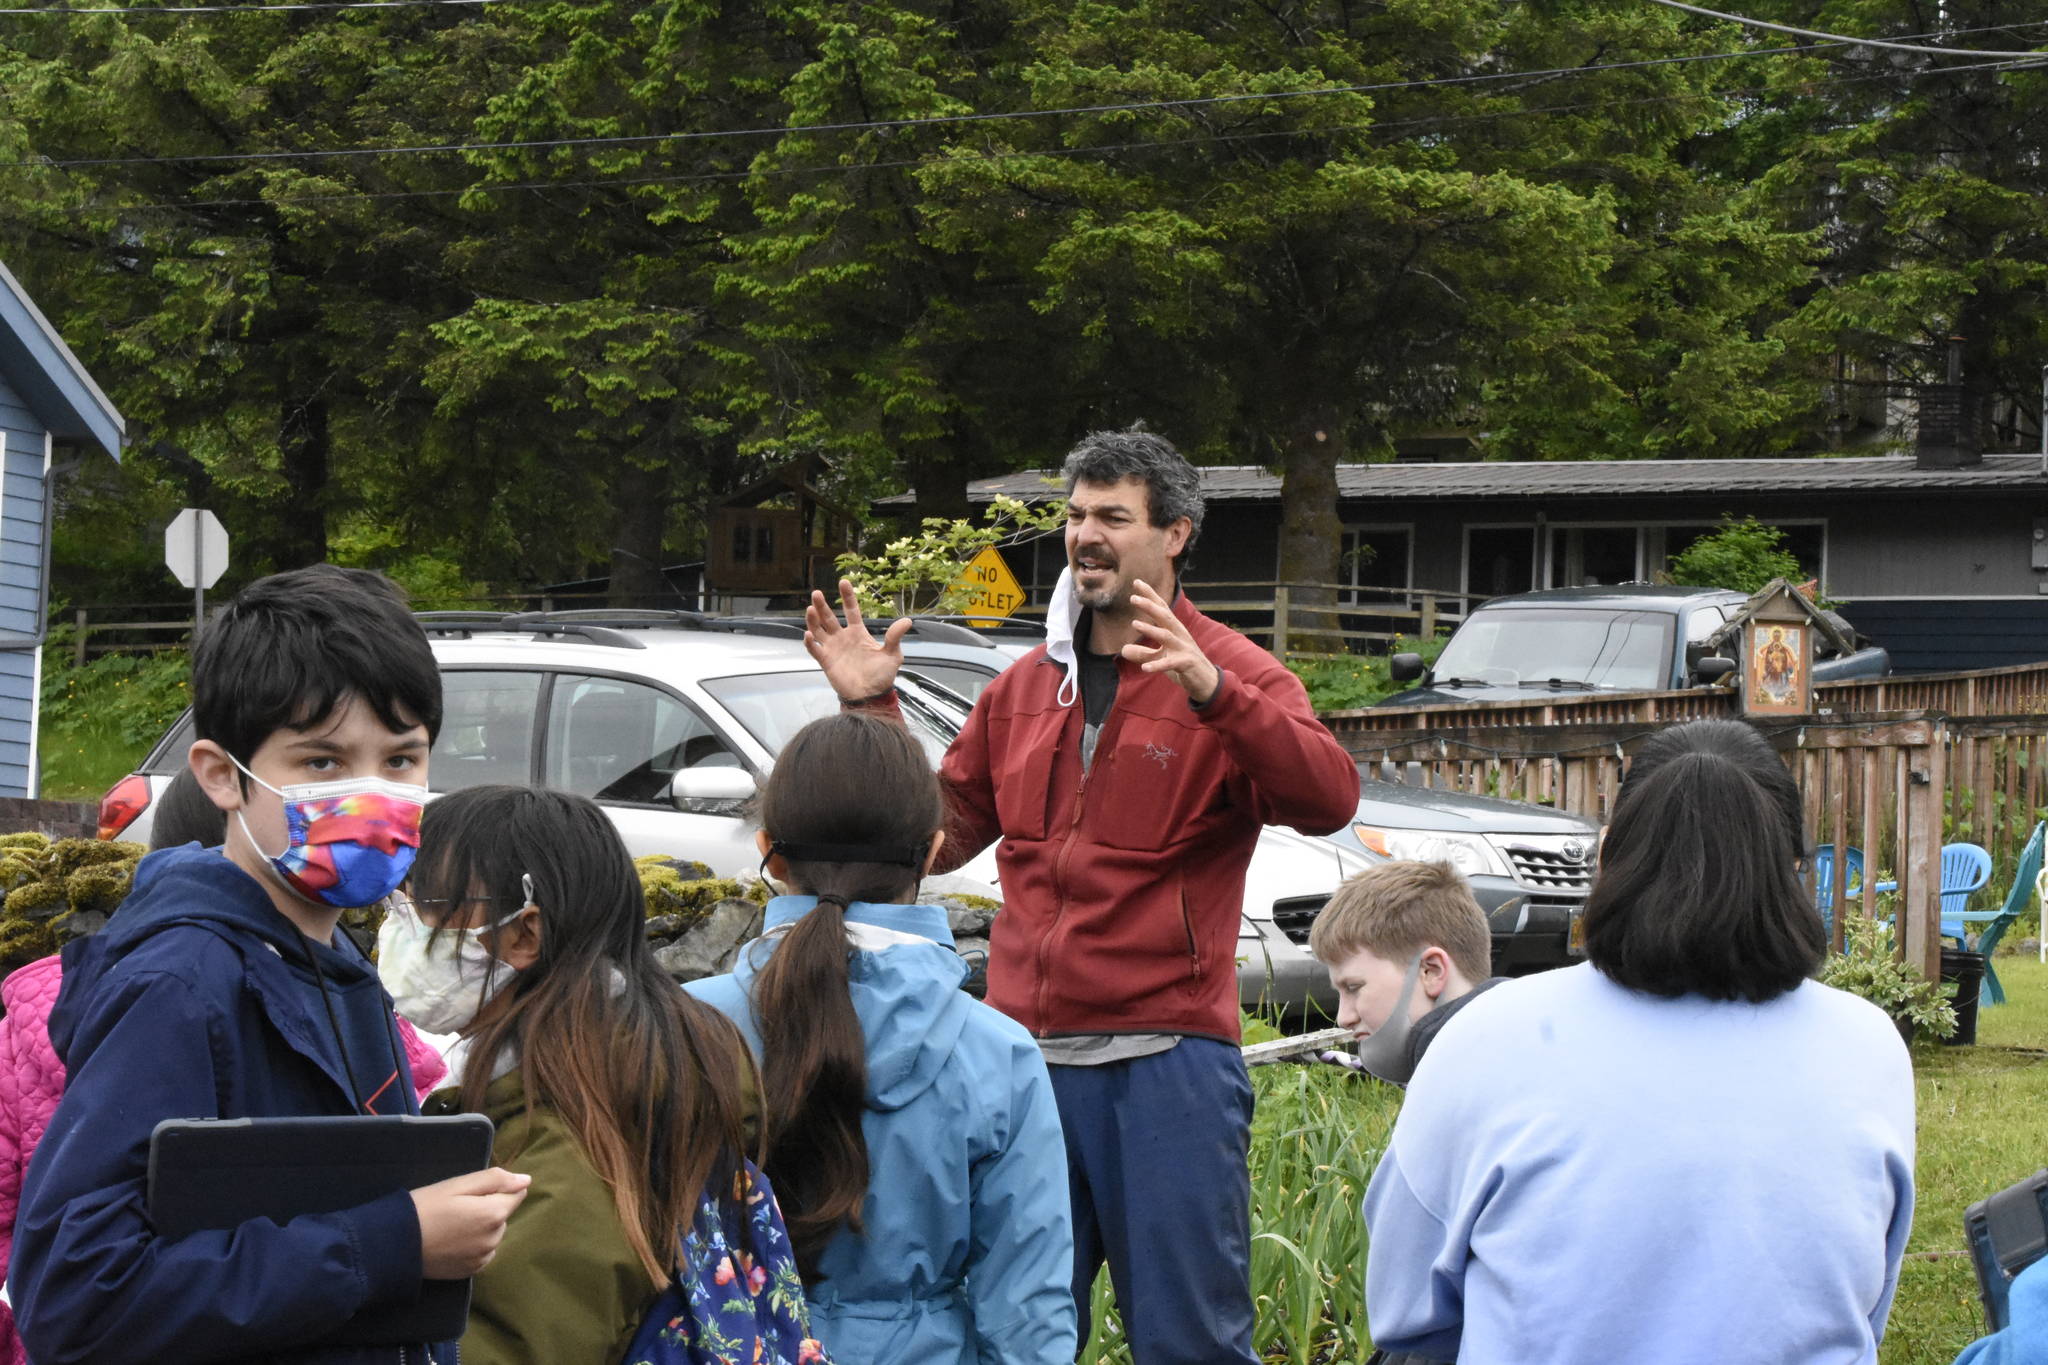 Peter Segall / Juneau Empire
Darren Snyder, who helps manage community gardens as part of the the University of Alaska Fairbanks Cooperative Extension Service, talks to kids about gardening in Southeast Alaska on June 11, 2021.